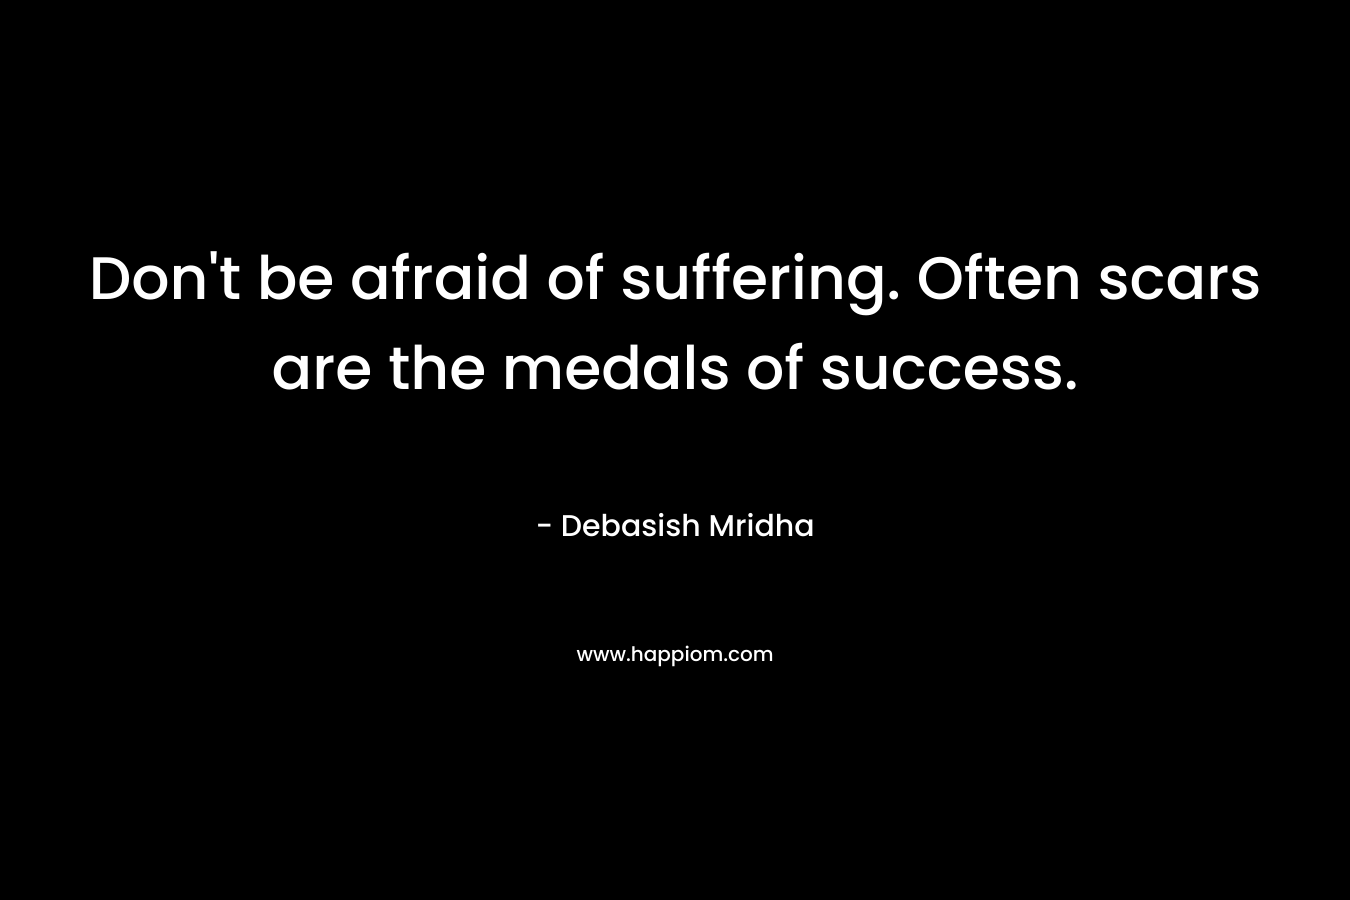 Don't be afraid of suffering. Often scars are the medals of success.